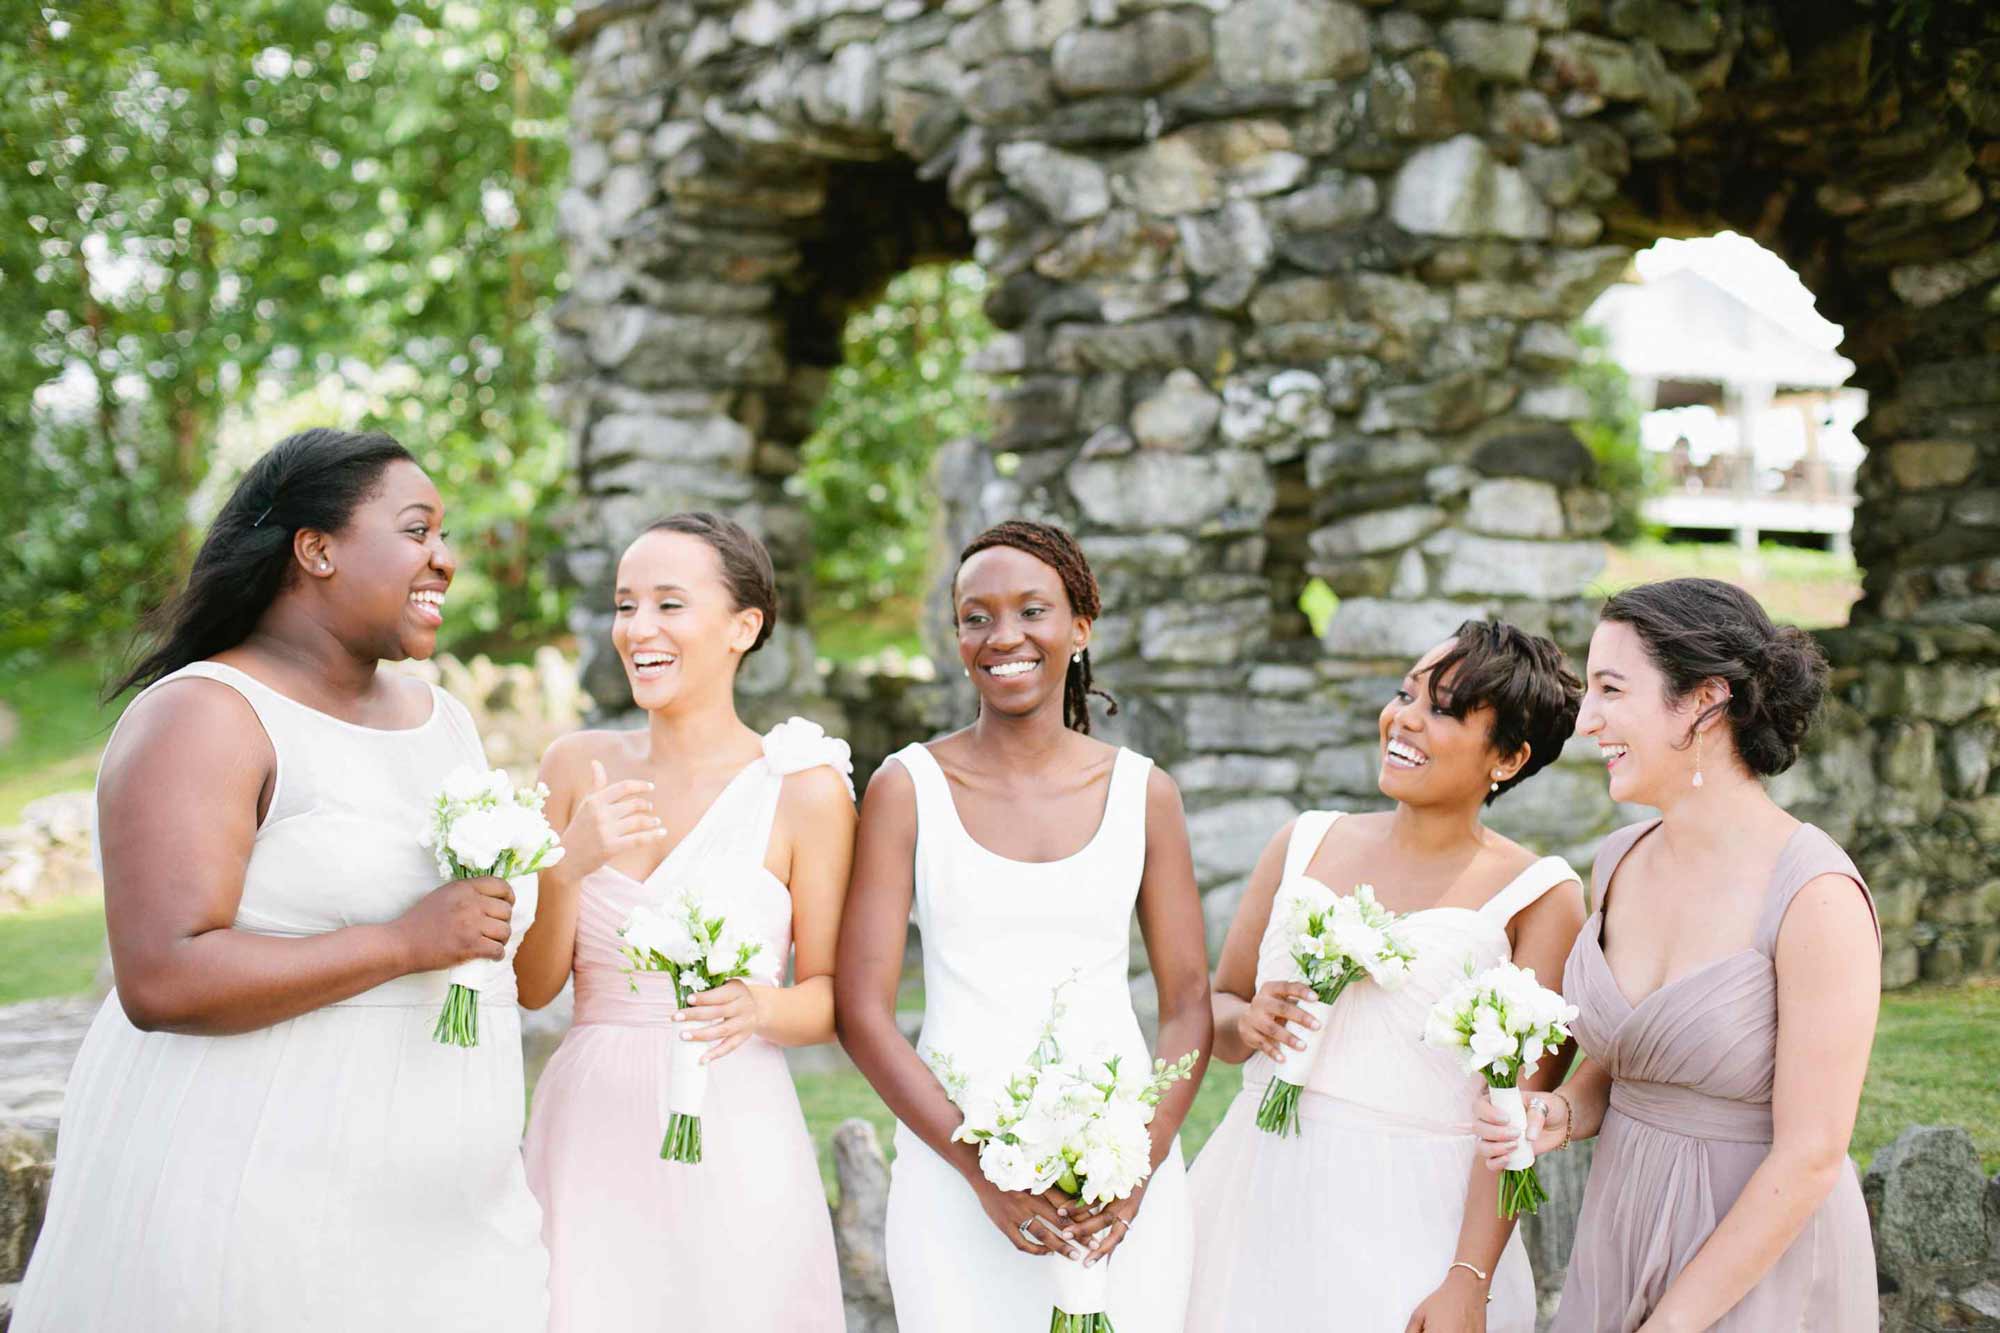 Group photo of 5 bridesmaids laughing at an outdoor wedding